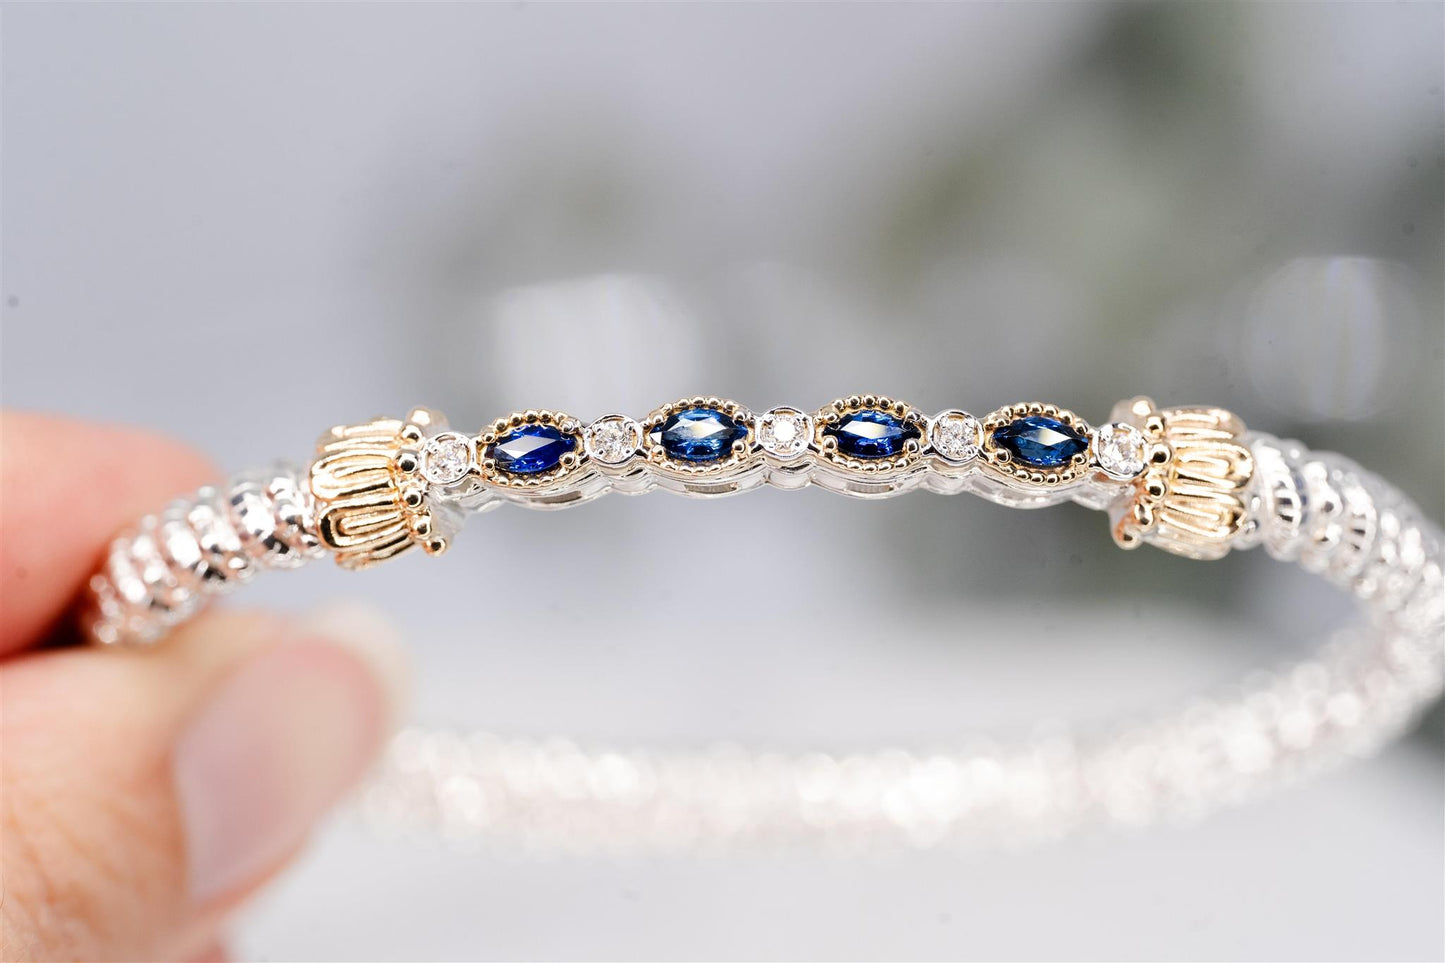 14K Yellow Gold and Sterling Silver Bracelet with Blue Sapphires and White Diamonds